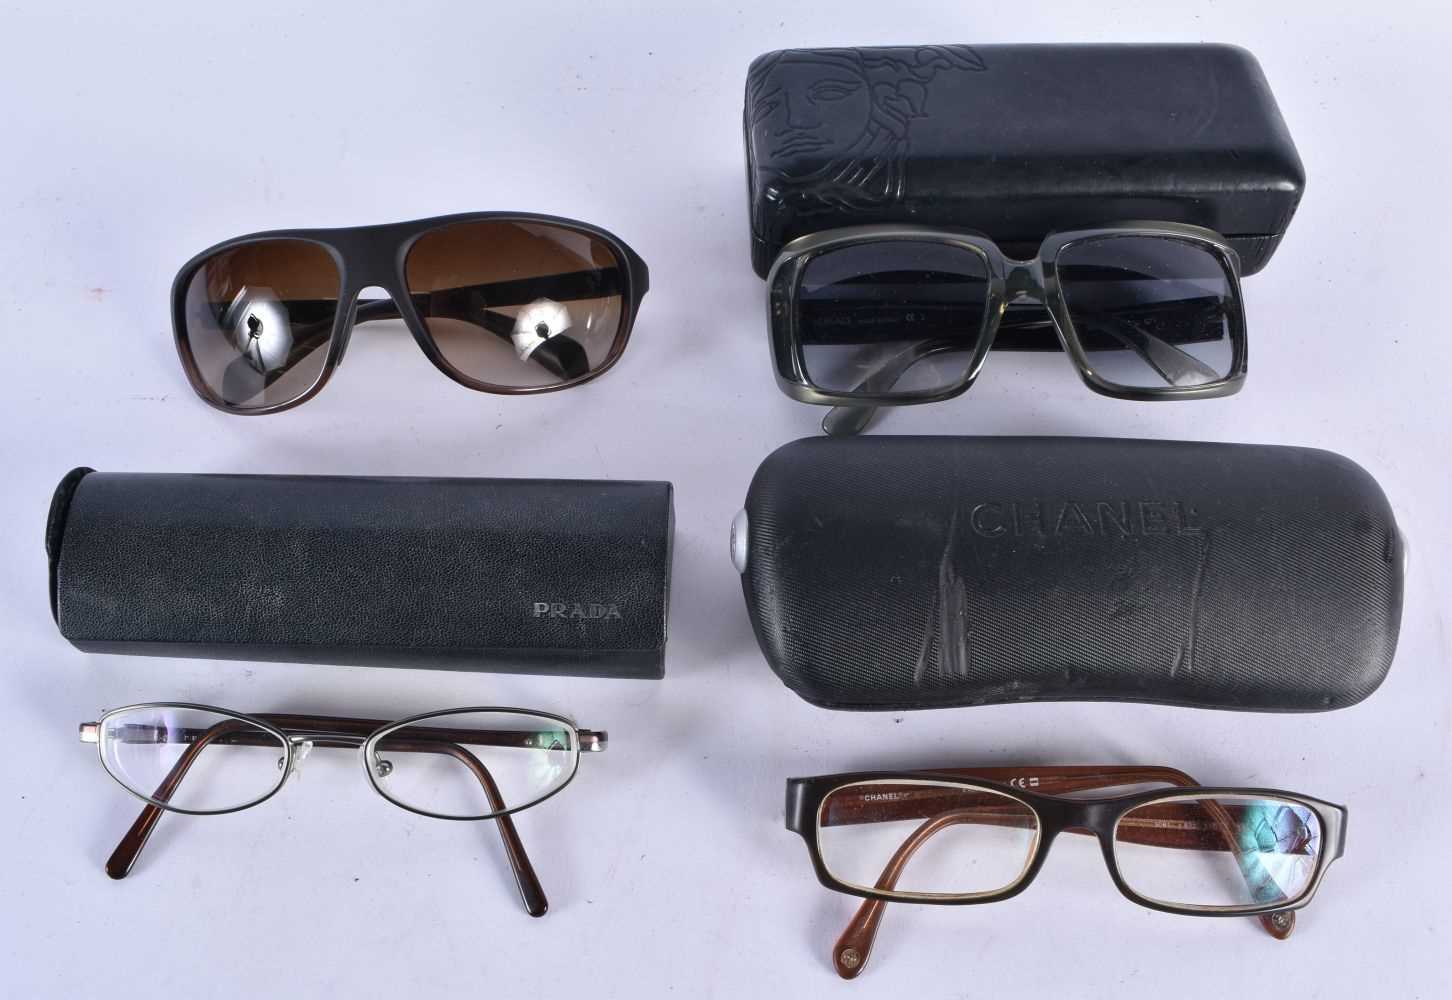 FOUR PAIRS OF RAYBAN SUNGLASSES. 15 cm wide. (4)